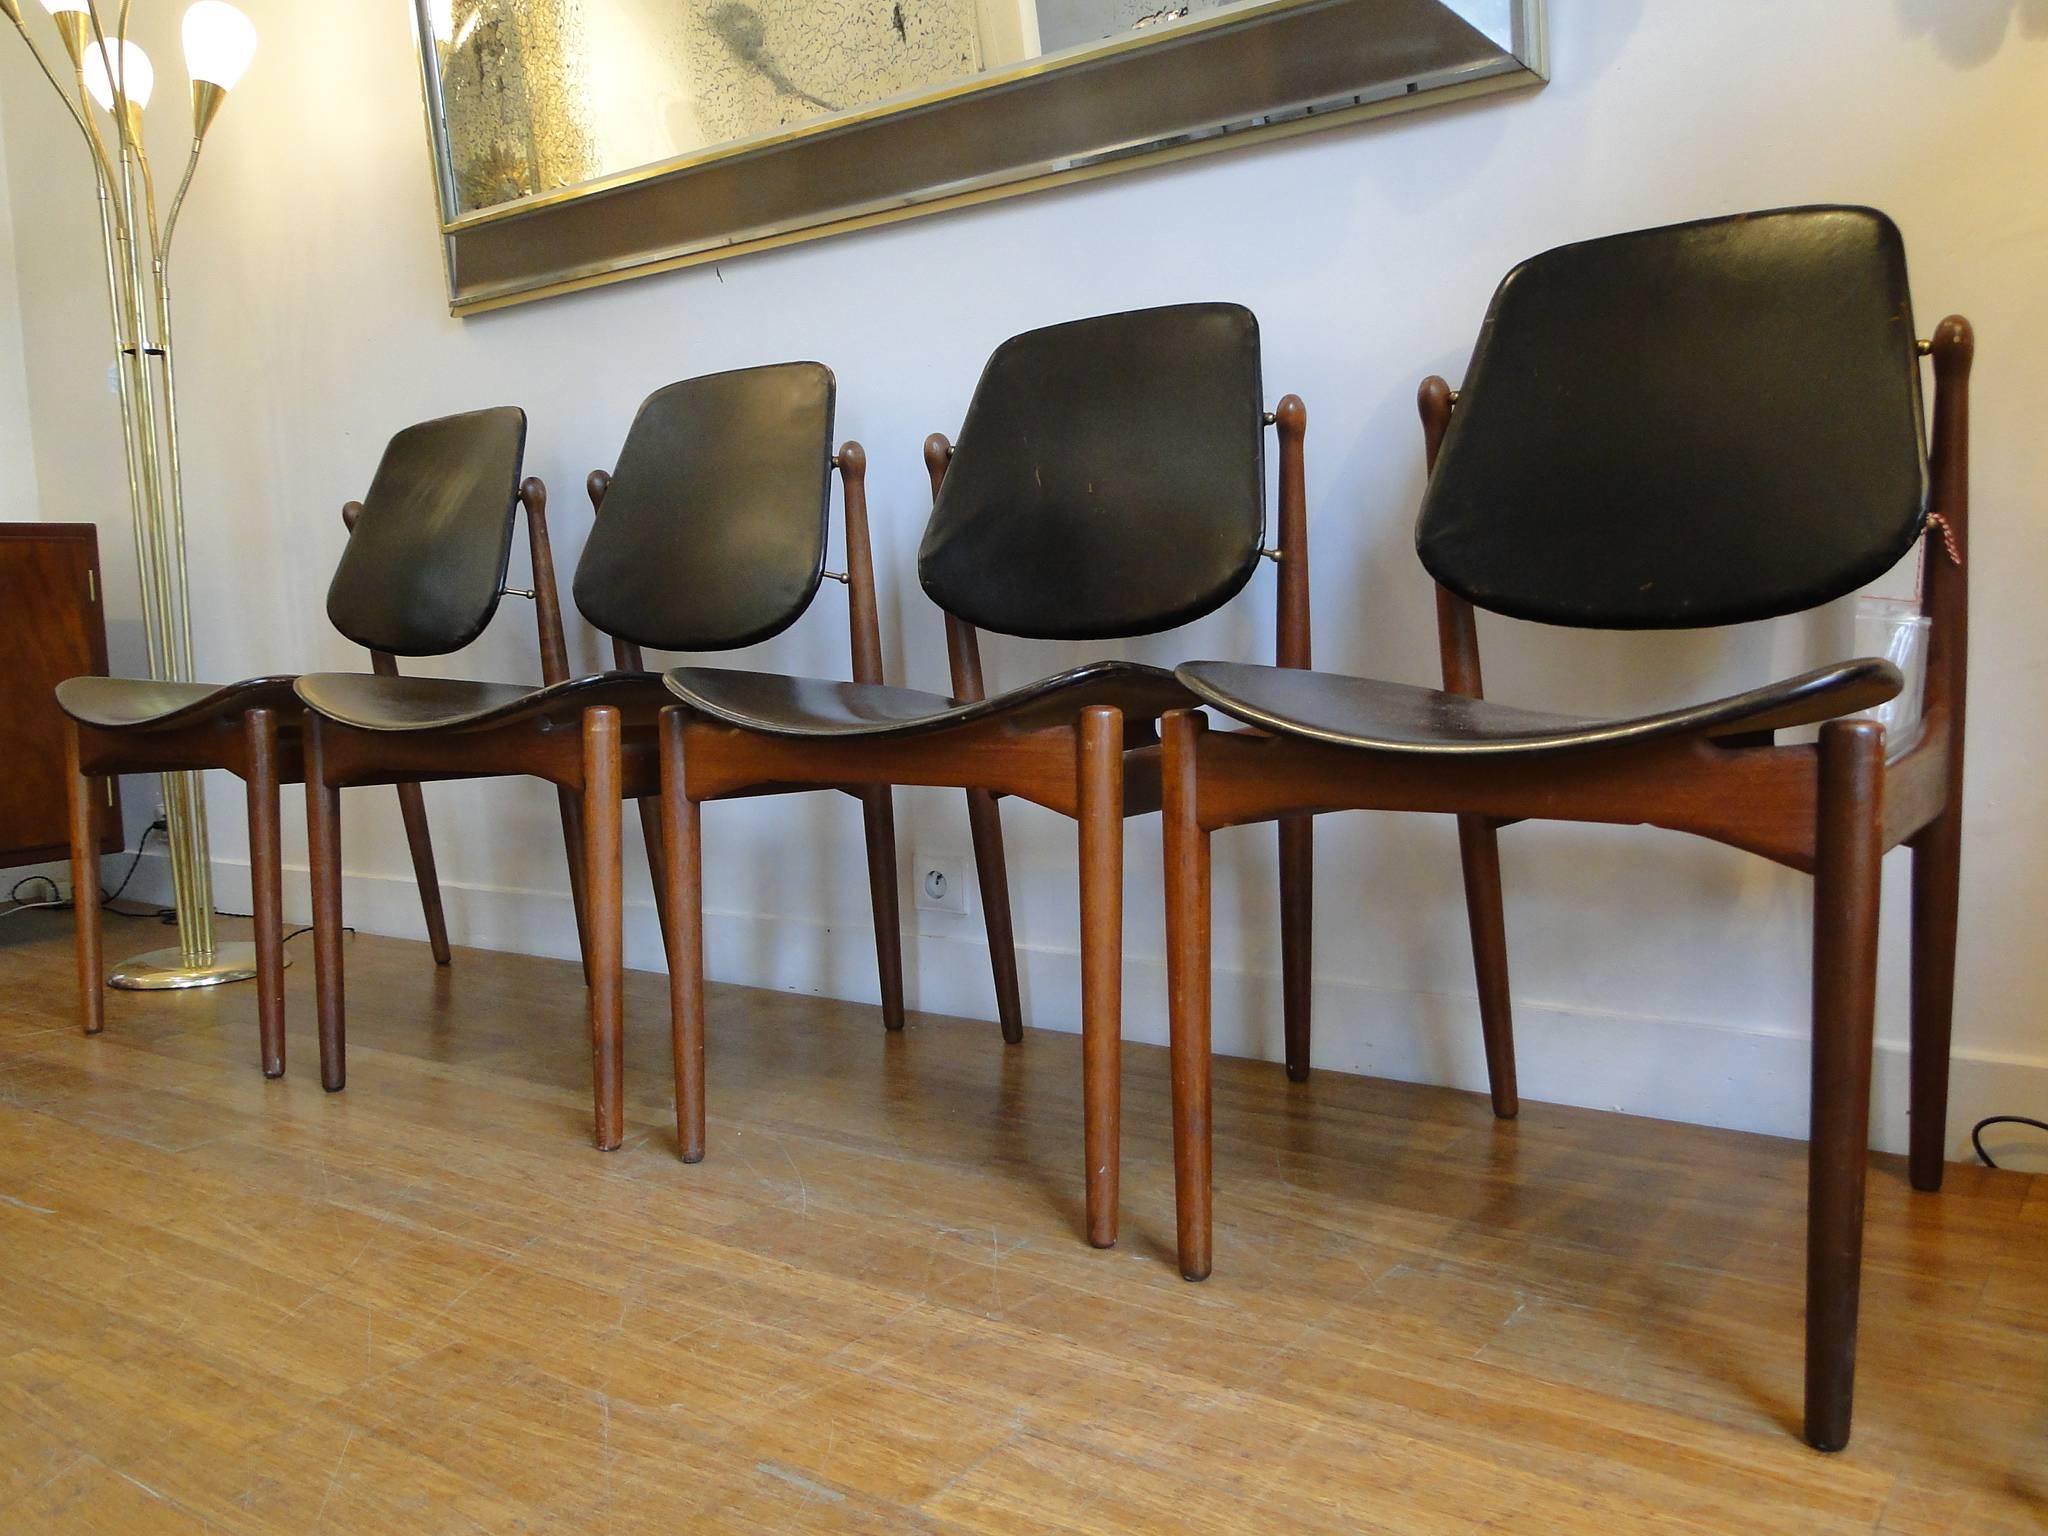 Arne Vodder Danish modern solid teak dining chairs made by France and Son of Denmark from 1957. Markers label with brass medallions and embossed insignia. The tilting black leather backs cradle the body for a very comfortable seating position. 
One